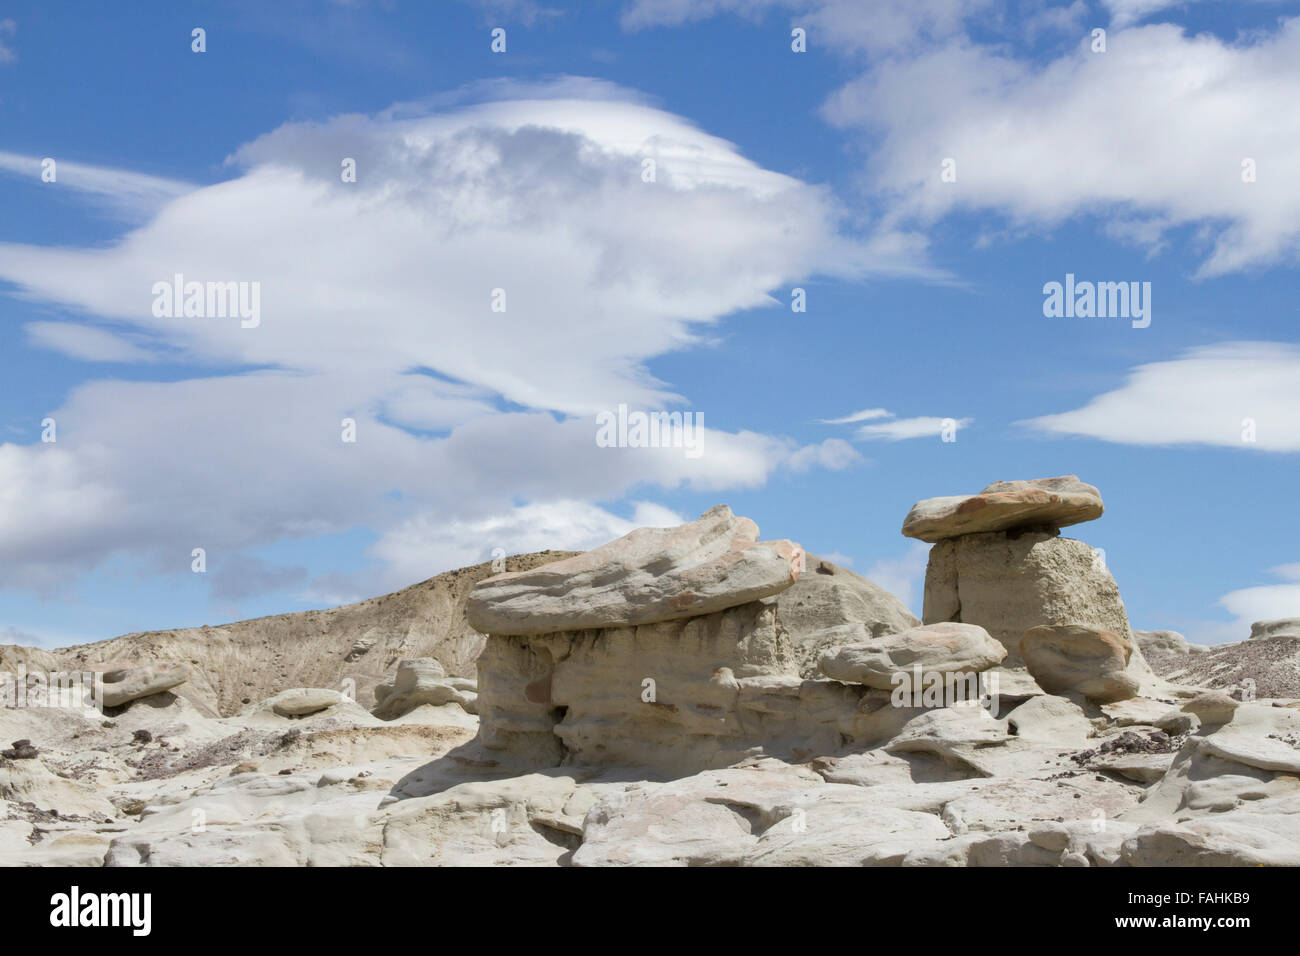 Lenticular clouds over rock formations in desert of La Leona Petrified Forest, Patagonia, Argentina. Stock Photo